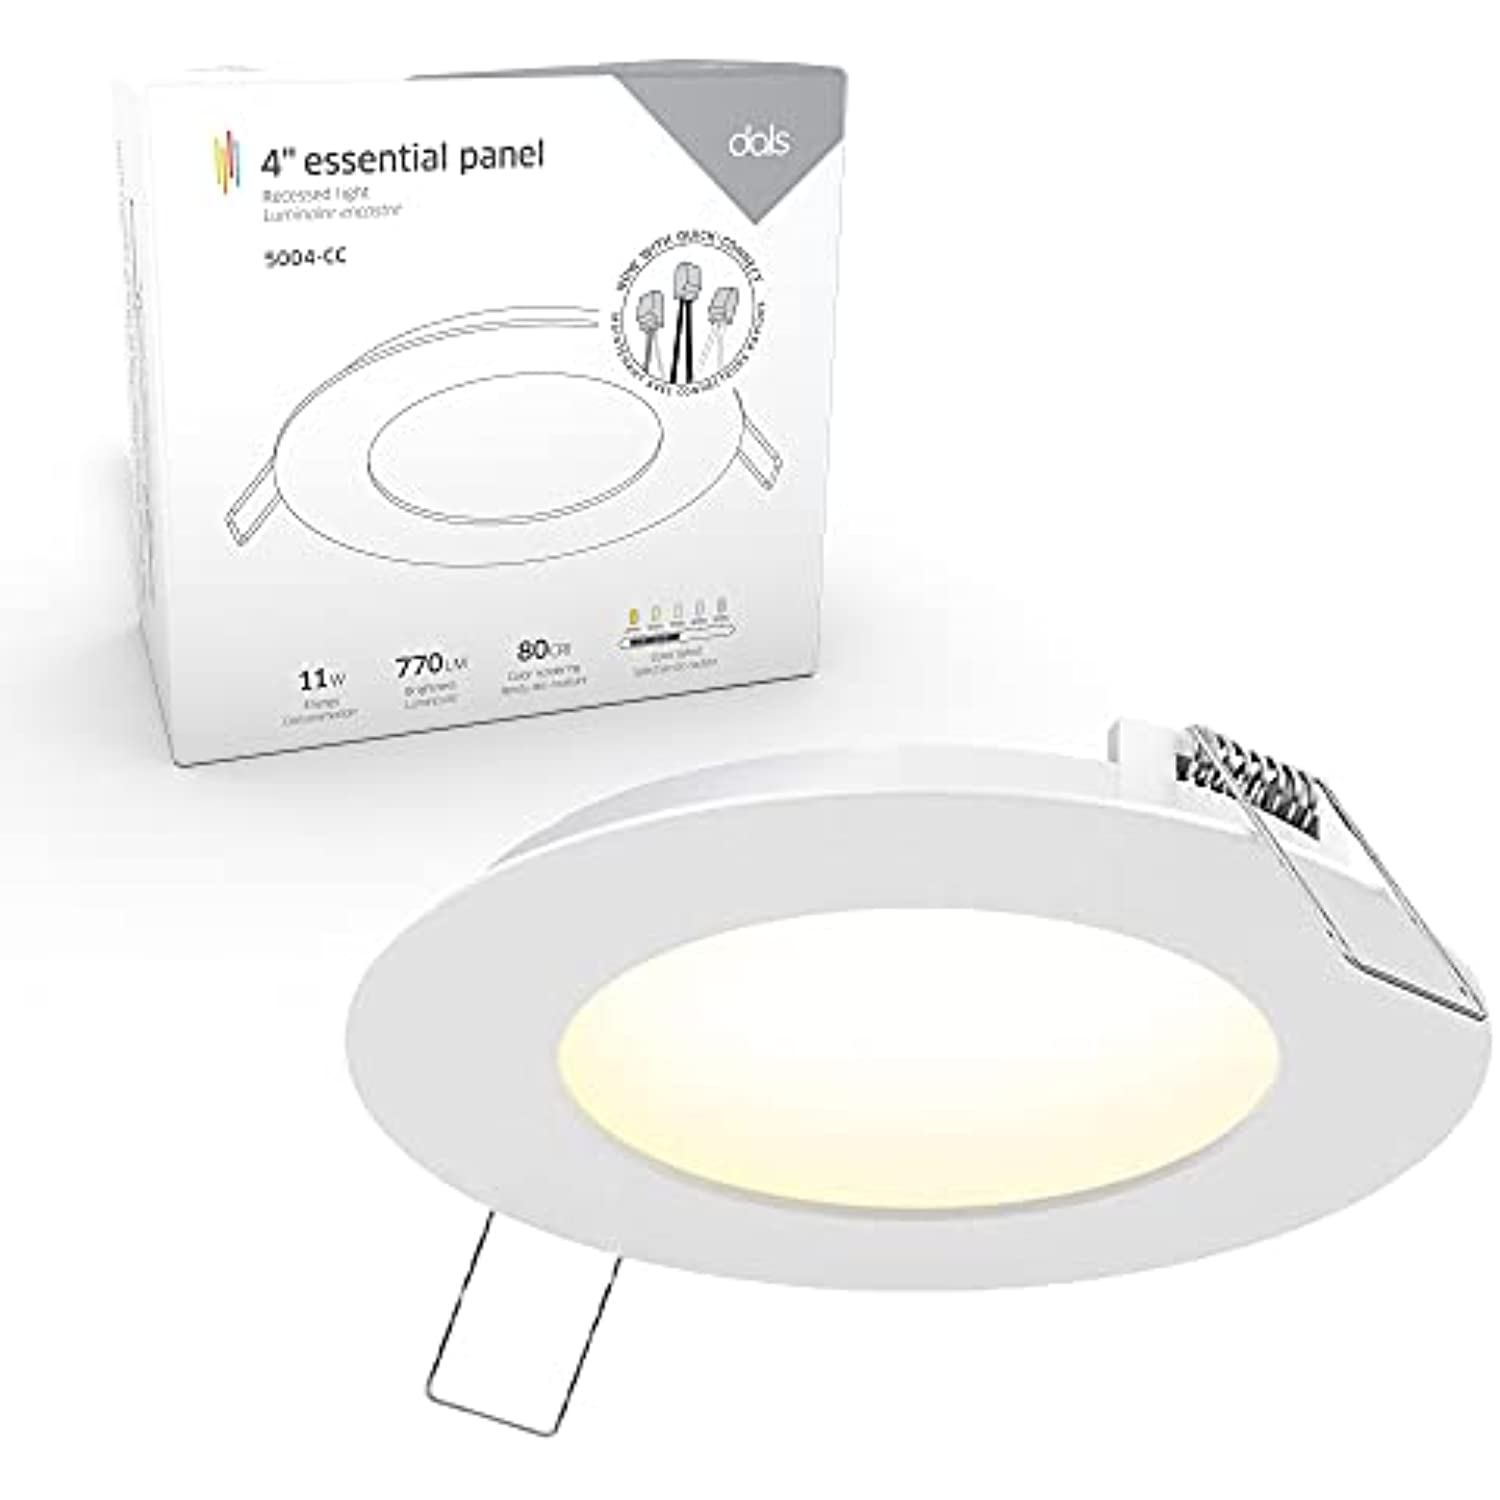 DALS Lighting - ‎5004-CC-WH DALS 4 Inch Round Recessed Panel Light with Junction Box/Driver | CCT Color Selectable 2700K, 3000K, 3500K, 4000K, 5000K | 11W, 770 Lumens | Dimmable Pot Light | Wet Rated | ETL Certified | White